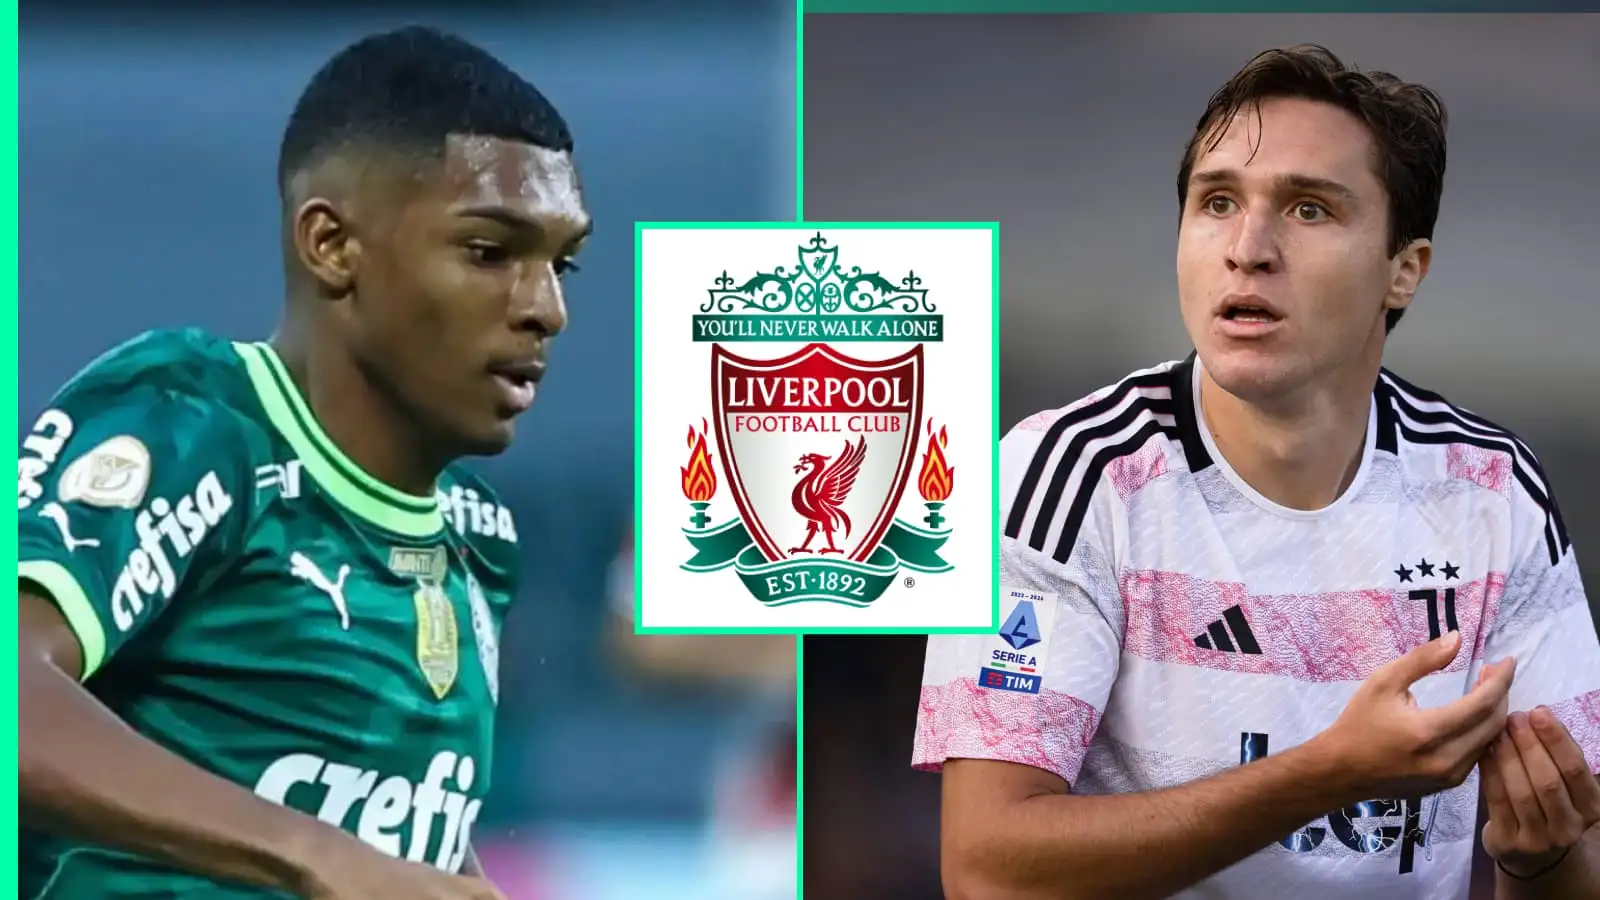 Liverpool will reportedly move for Luis Guilherme of Palmeiras and Juventus winger Federico Chiesa